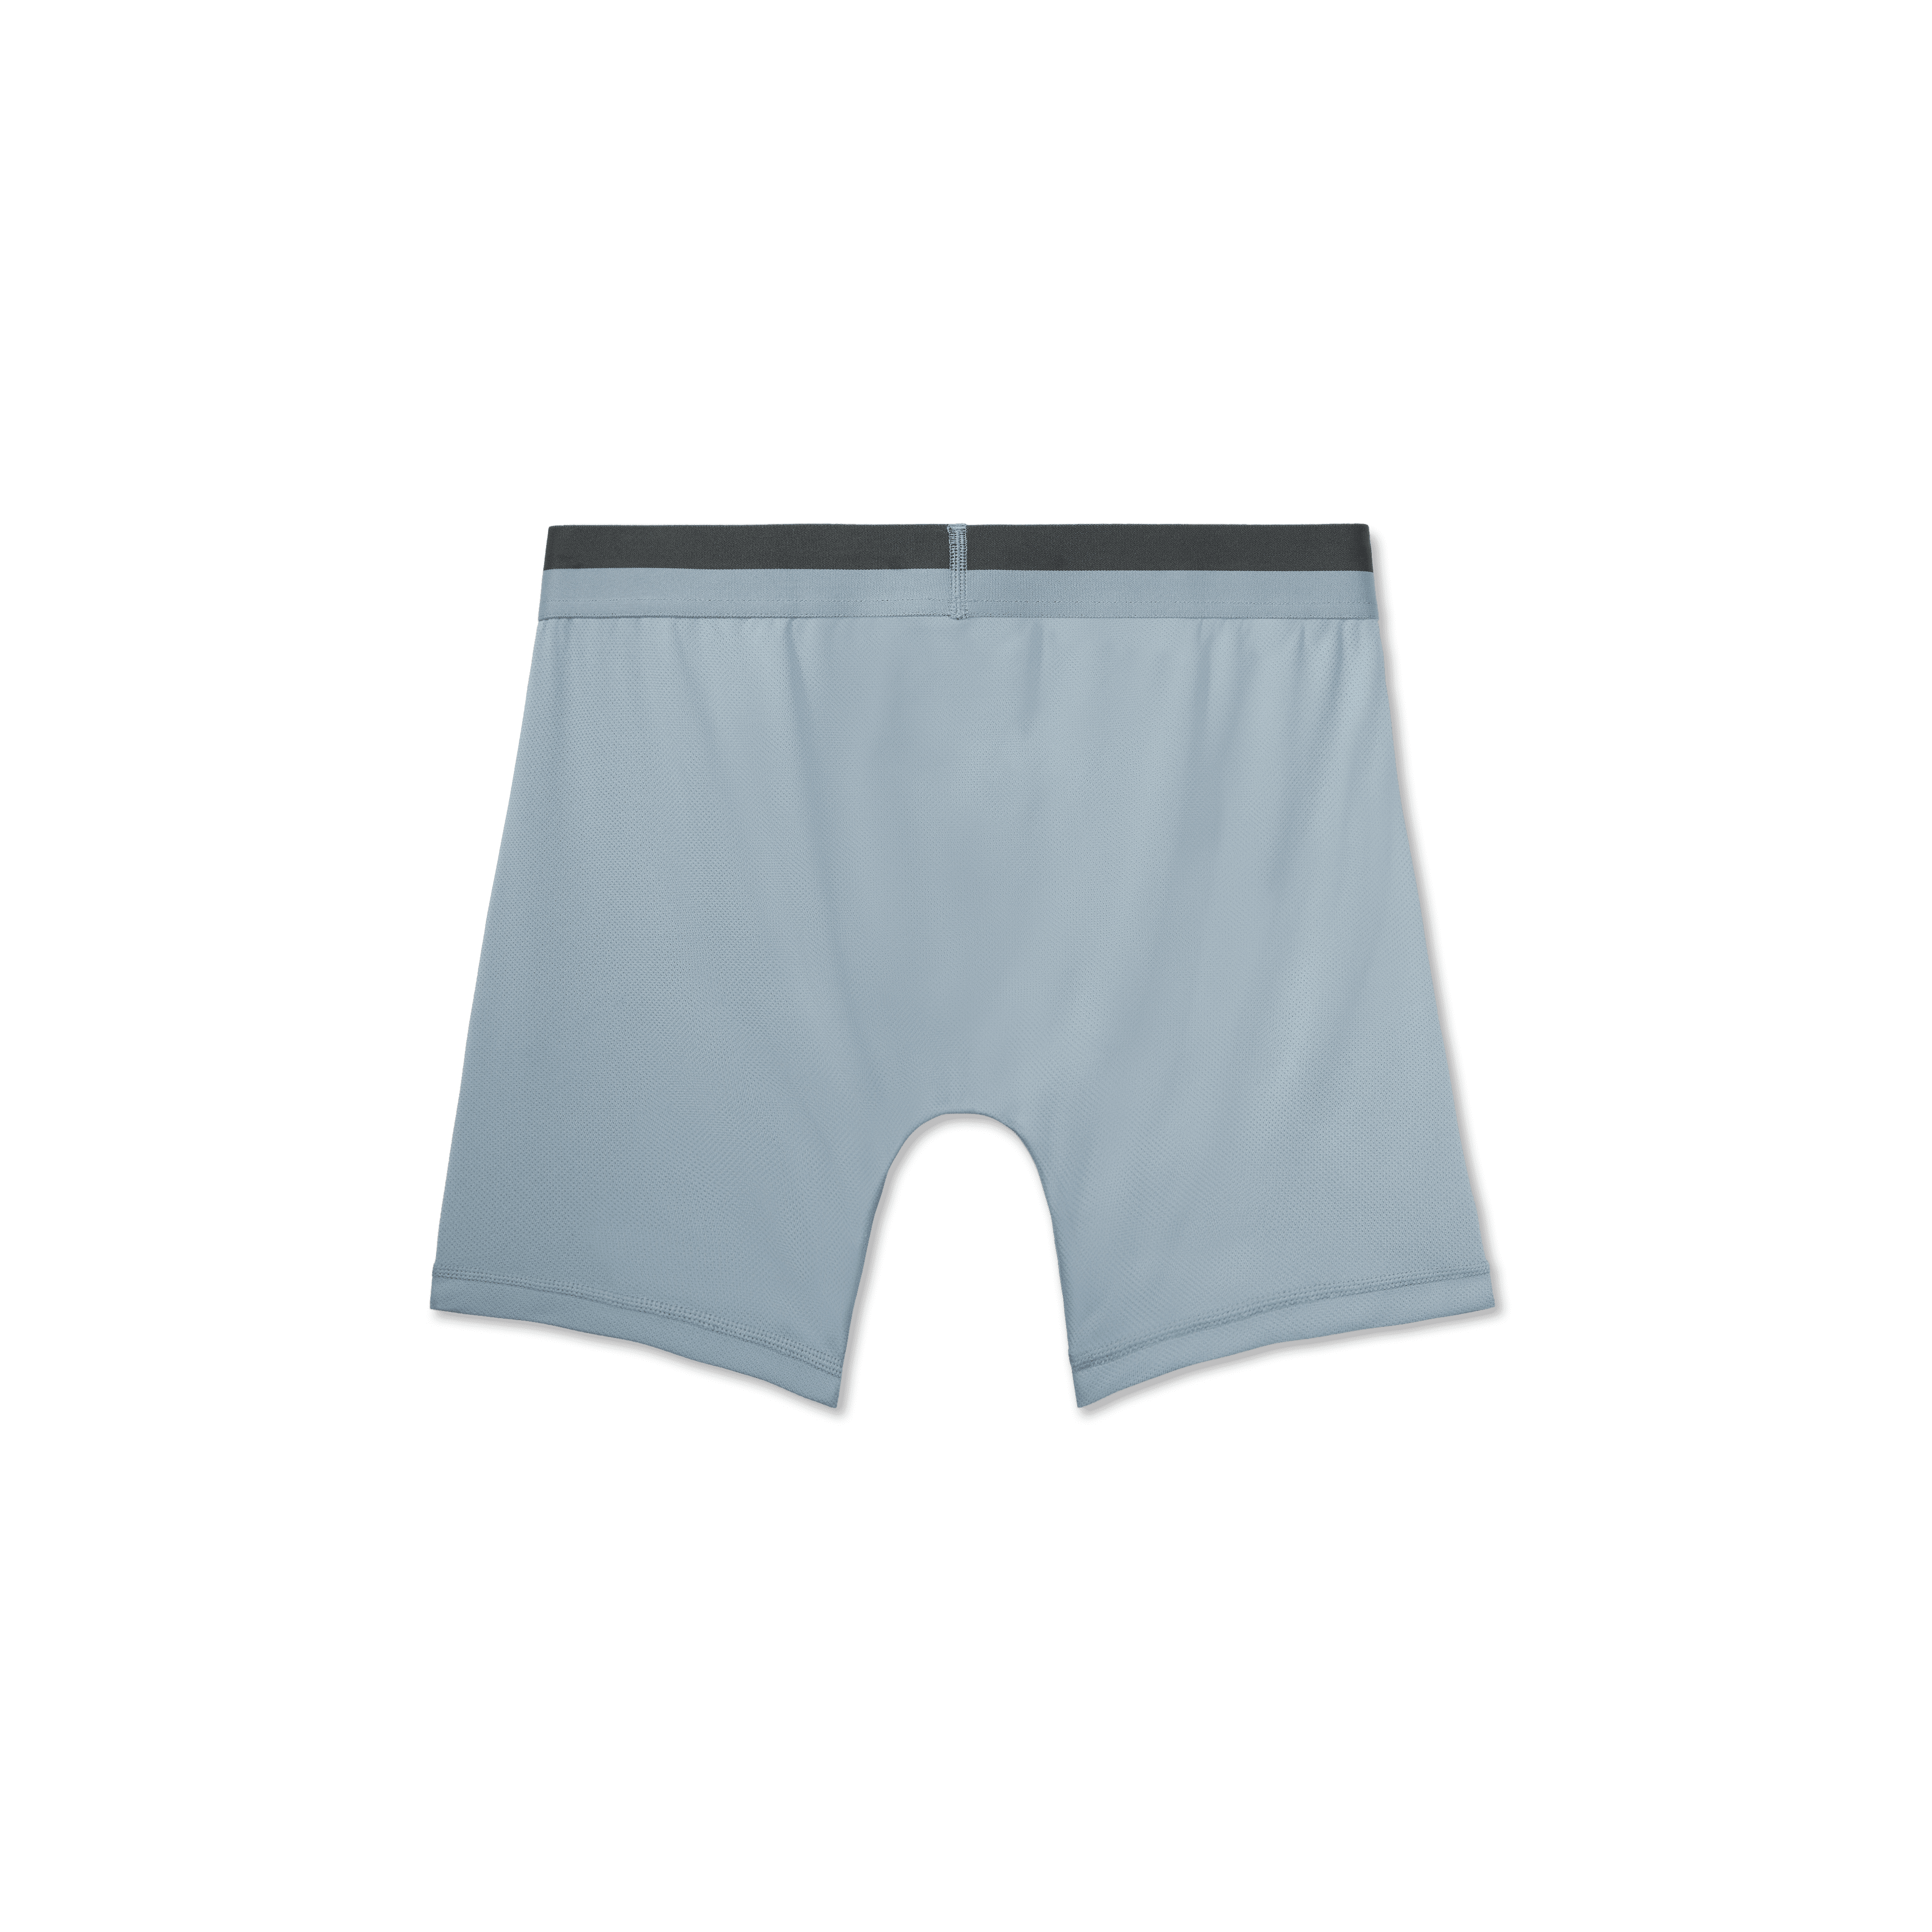 Mens Boxer Brief With Fly - Donuts – Mikkel Hollins